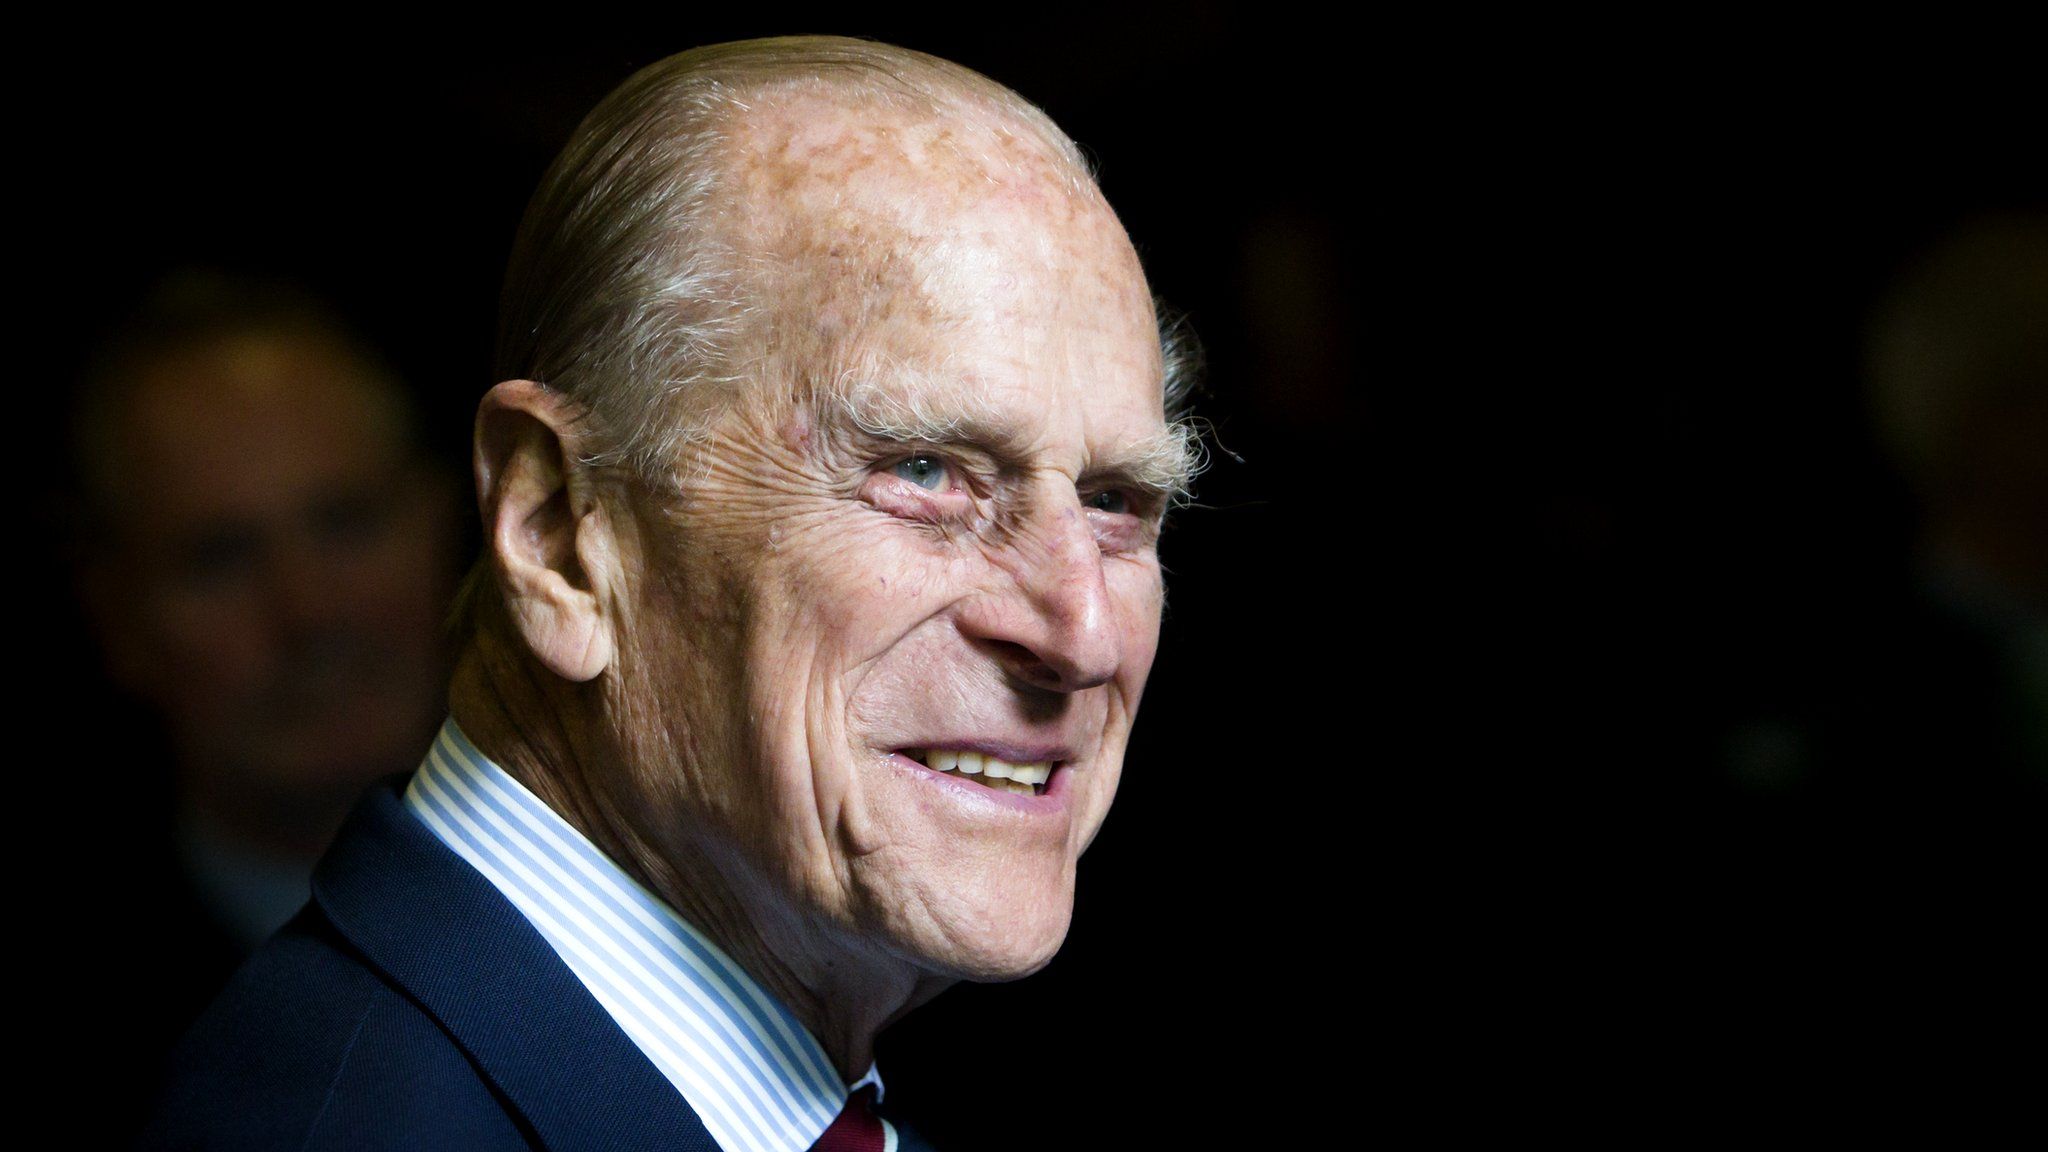 Prince Philip in July 2015